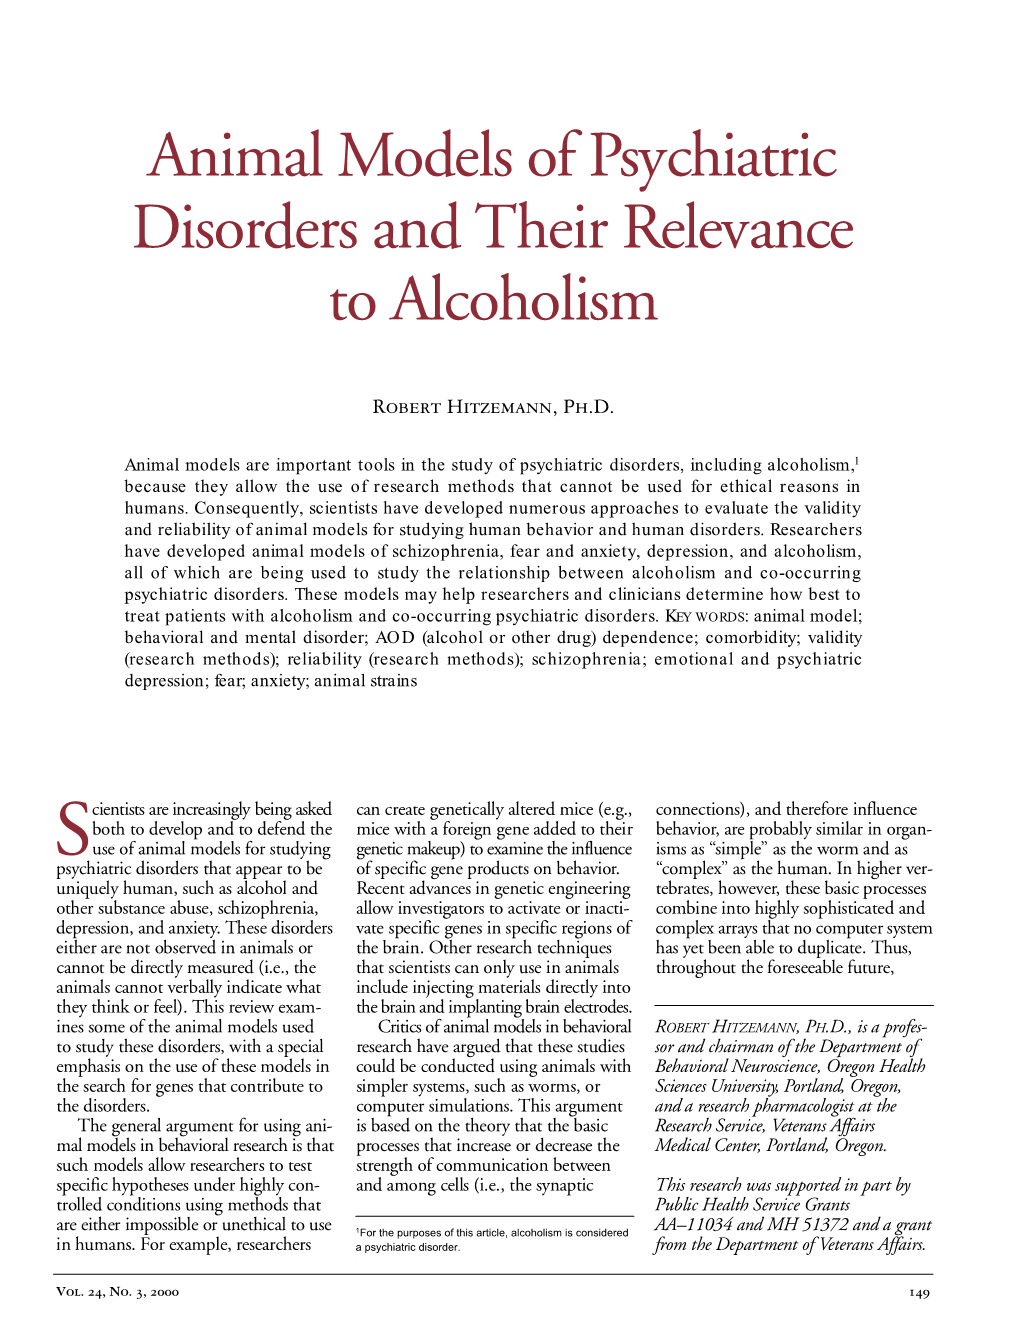 Animal Models of Psychiatric Disorders and Their Relevance to Alcoholism